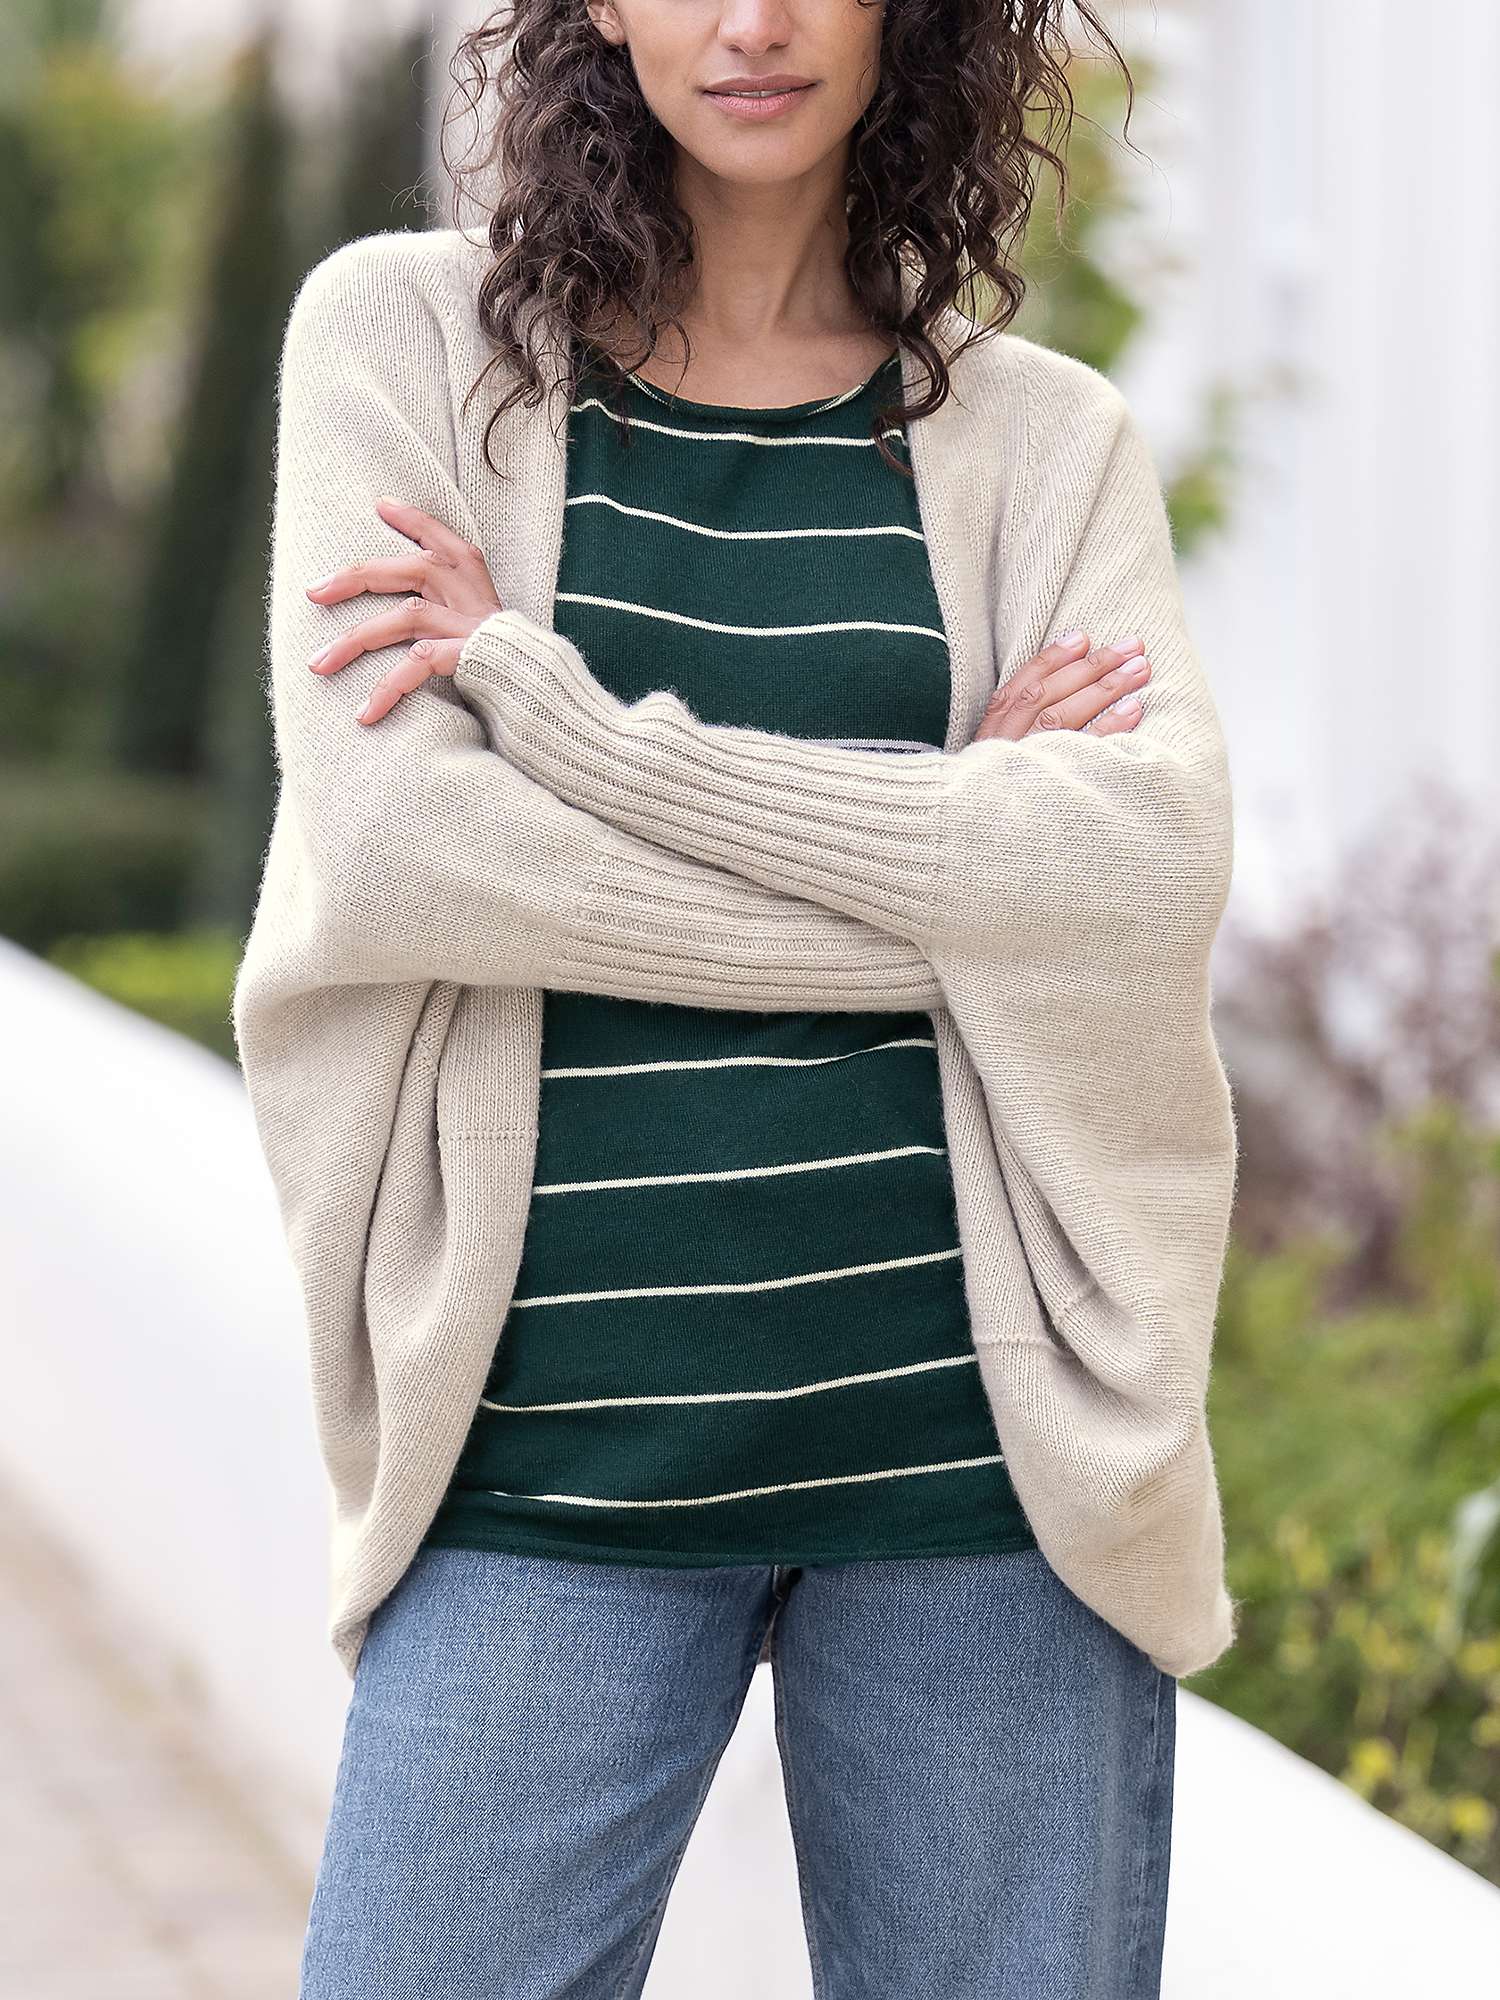 Buy Celtic & Co. Cocoon Lambswool Cardigan, Oatmeal Online at johnlewis.com